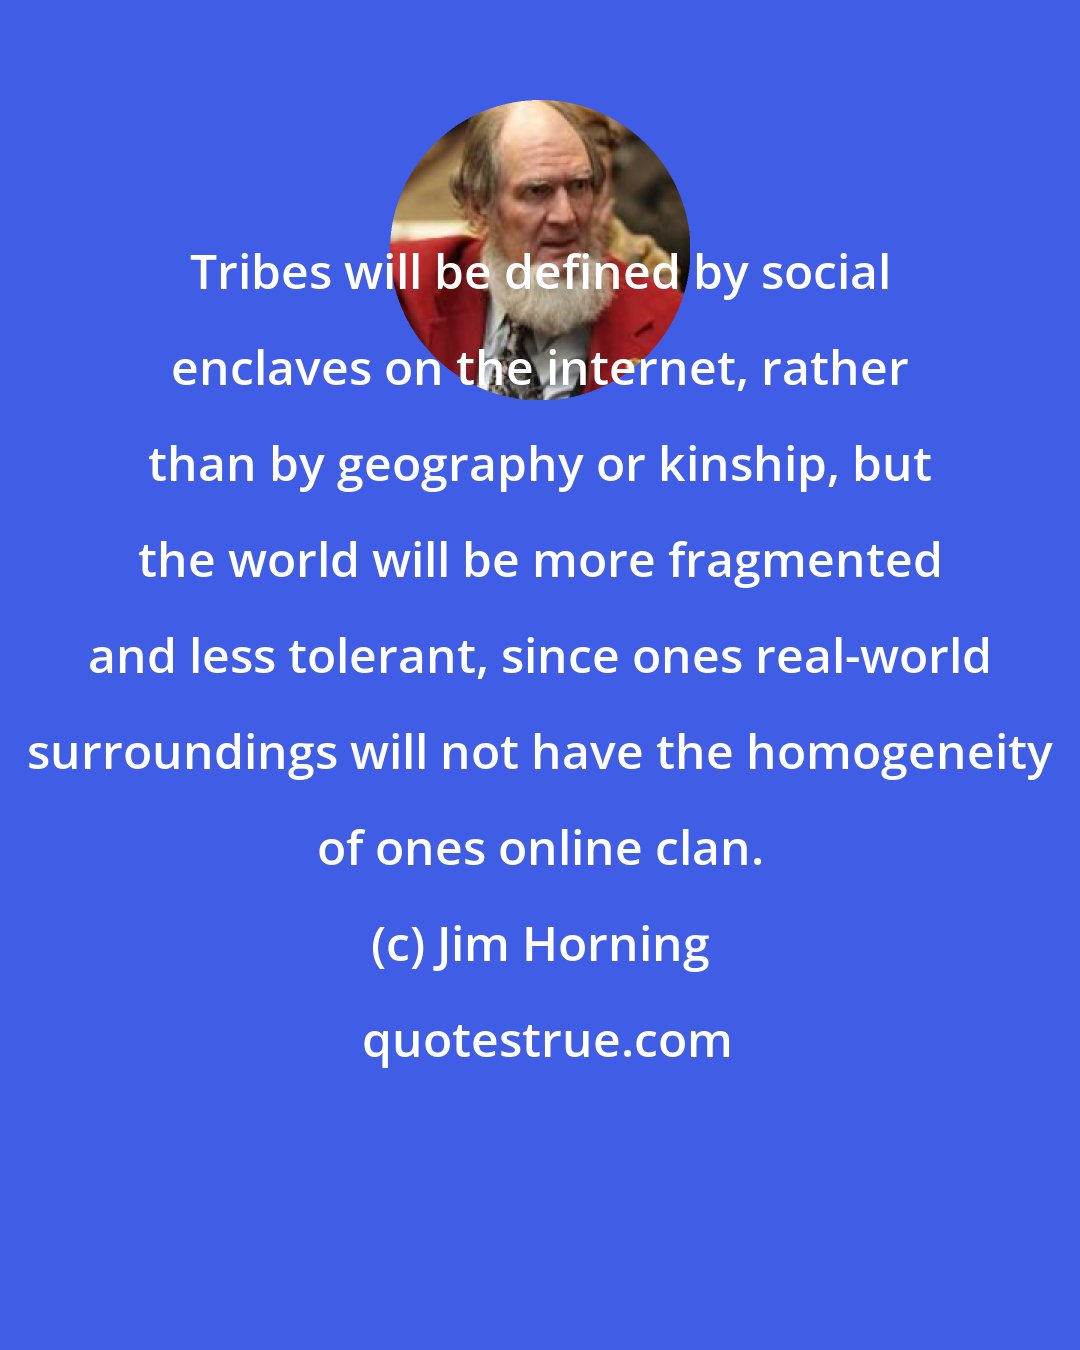 Jim Horning: Tribes will be defined by social enclaves on the internet, rather than by geography or kinship, but the world will be more fragmented and less tolerant, since ones real-world surroundings will not have the homogeneity of ones online clan.